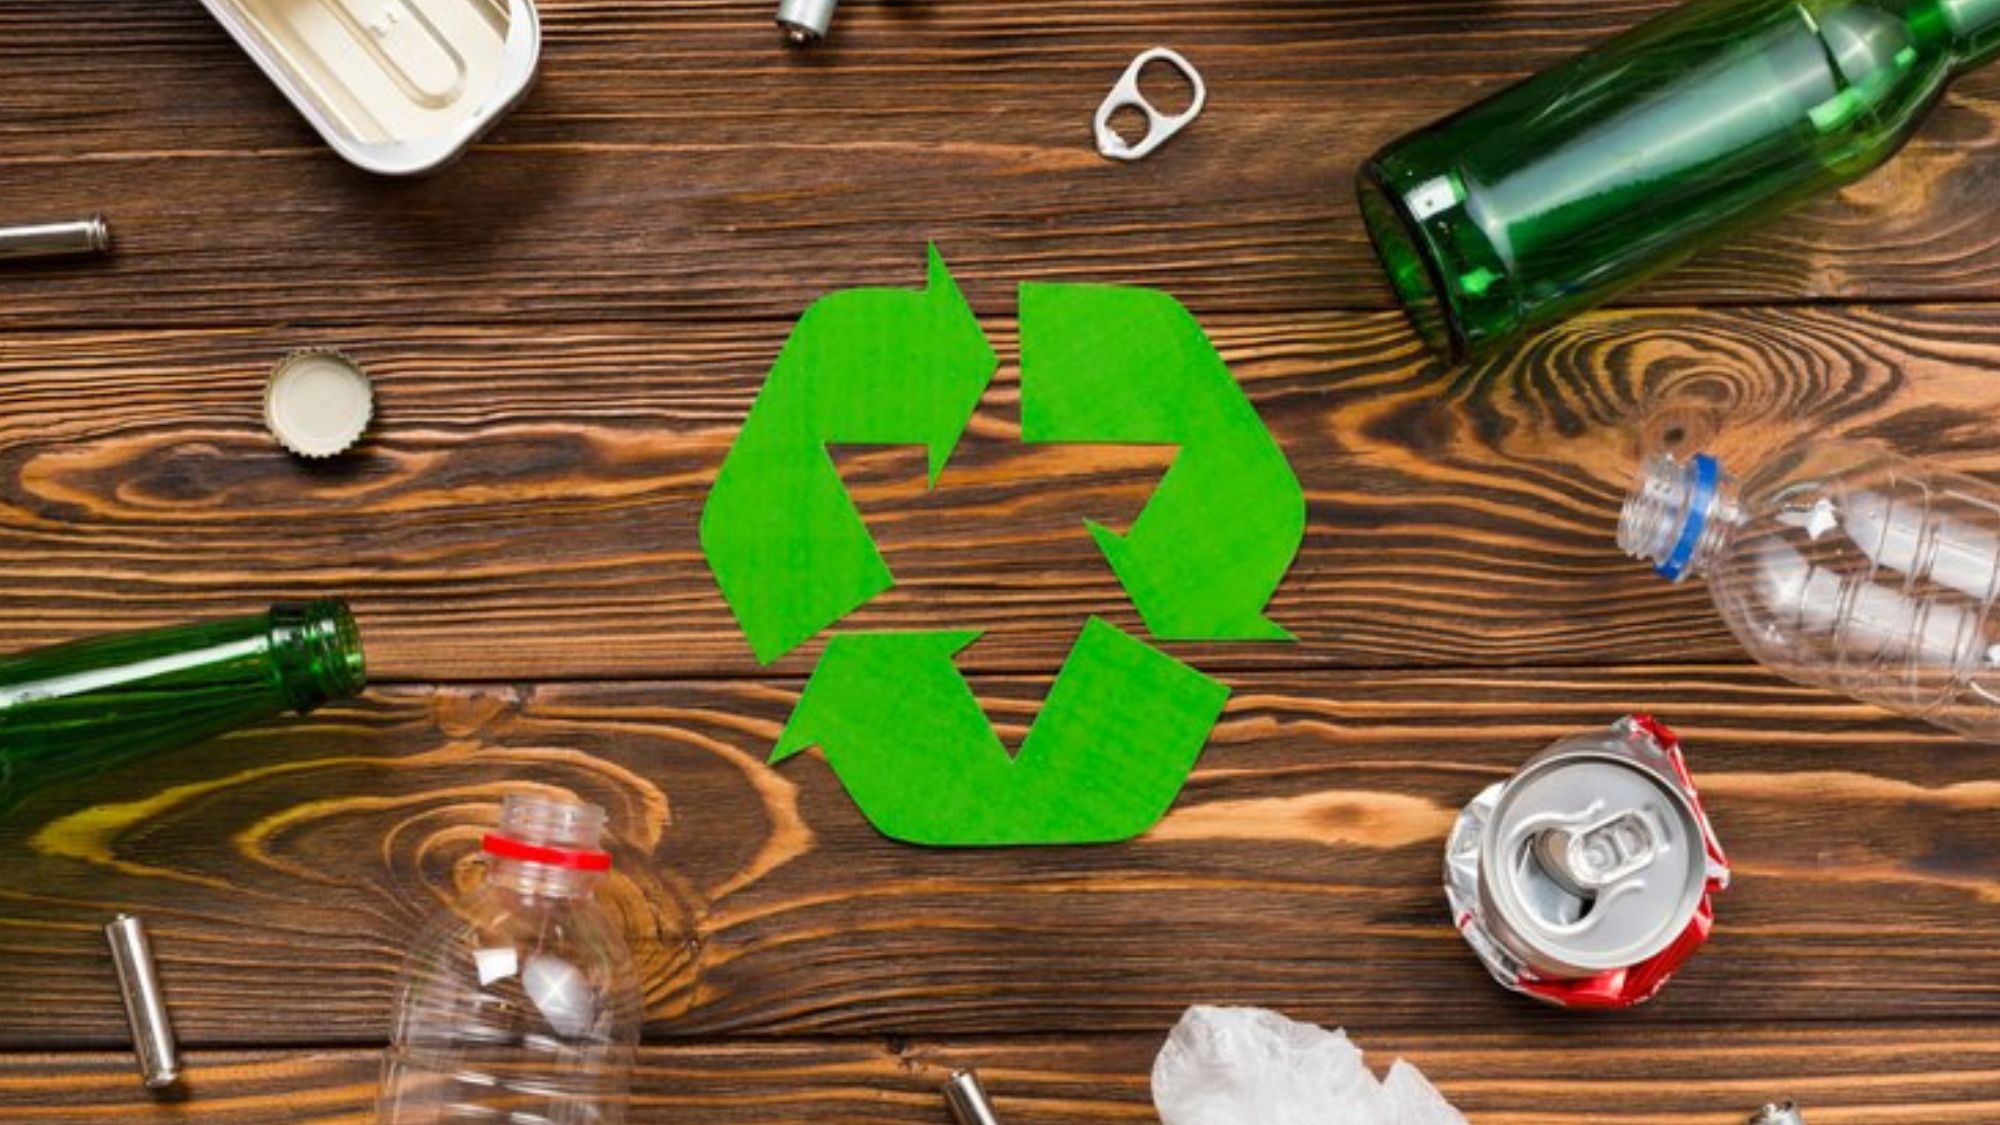 Recycling symbol on wooden table with bottles and other items